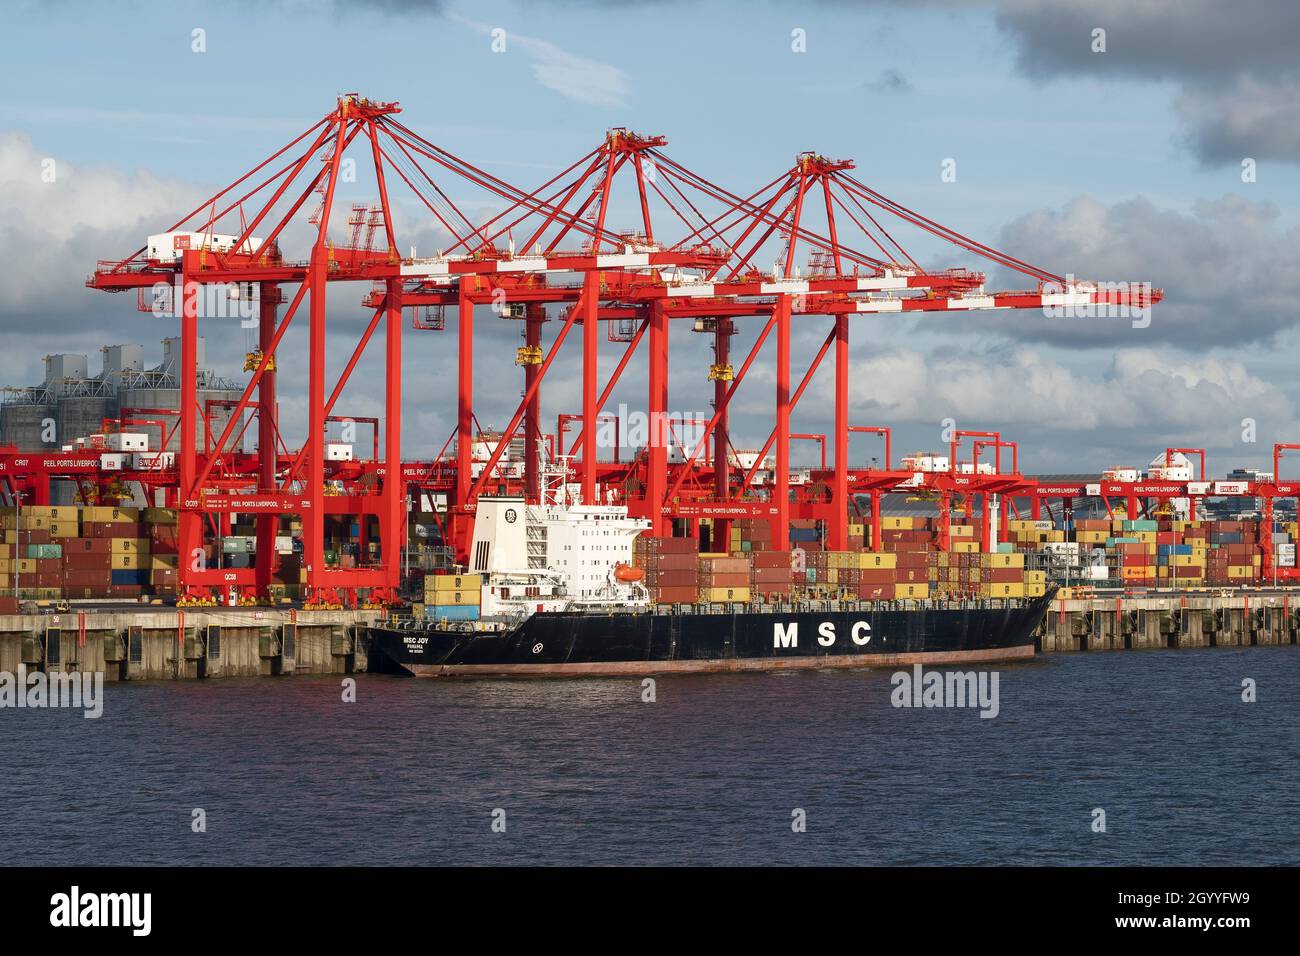 The container ship MSC Joy docked at Peel Ports Liverpool UK Stock Photo